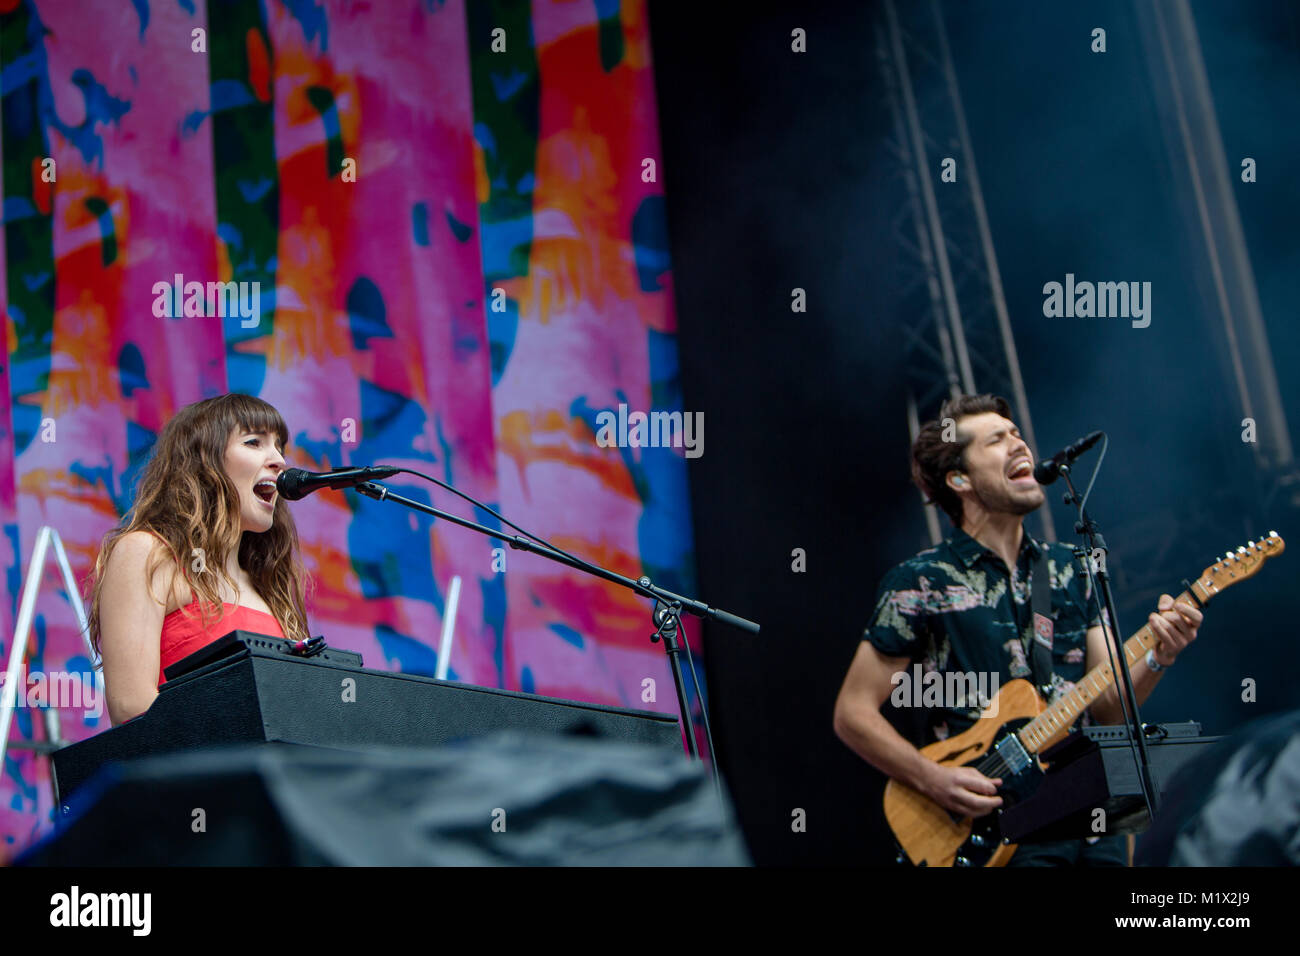 Norway, Bergen – June 17, 2017. The English indie pop duo Oh Wonder performs a live concert during the Norwegian music festival Bergenfest 2017 in Bergen. Here singers and musicians Josephine Vander Gucht (L) and Anthony West (R) are seen live on stage. Stock Photo